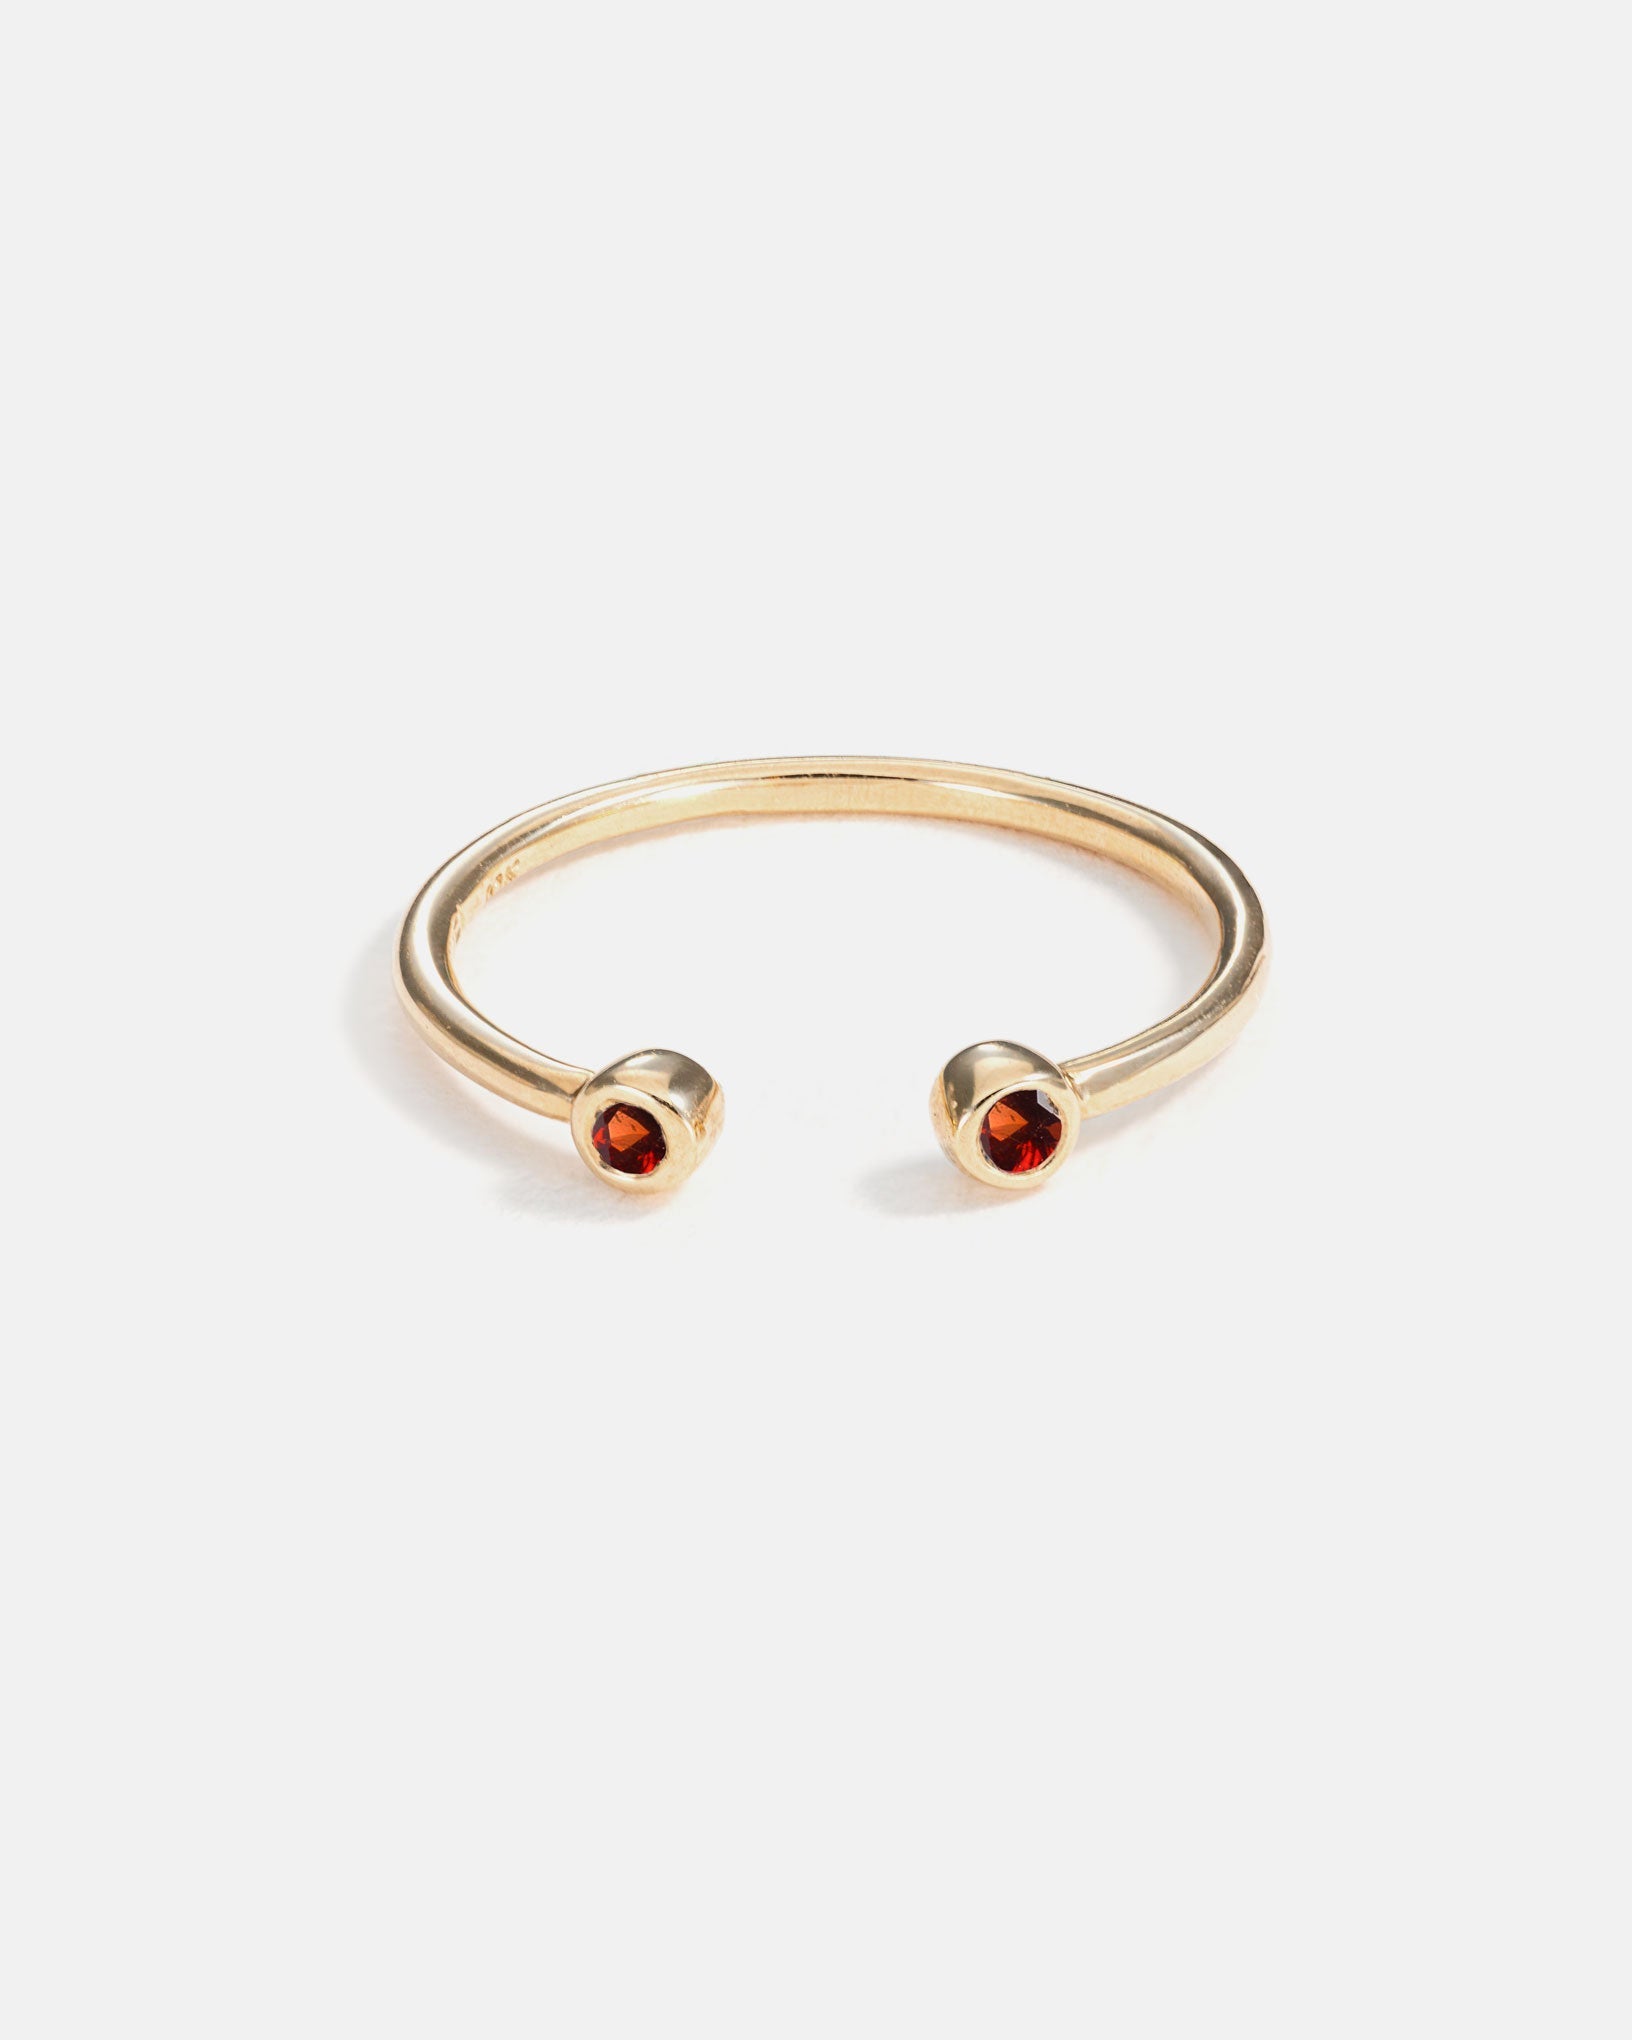 Hiro Band in 14k Yellow Gold with Ethical Birthstones